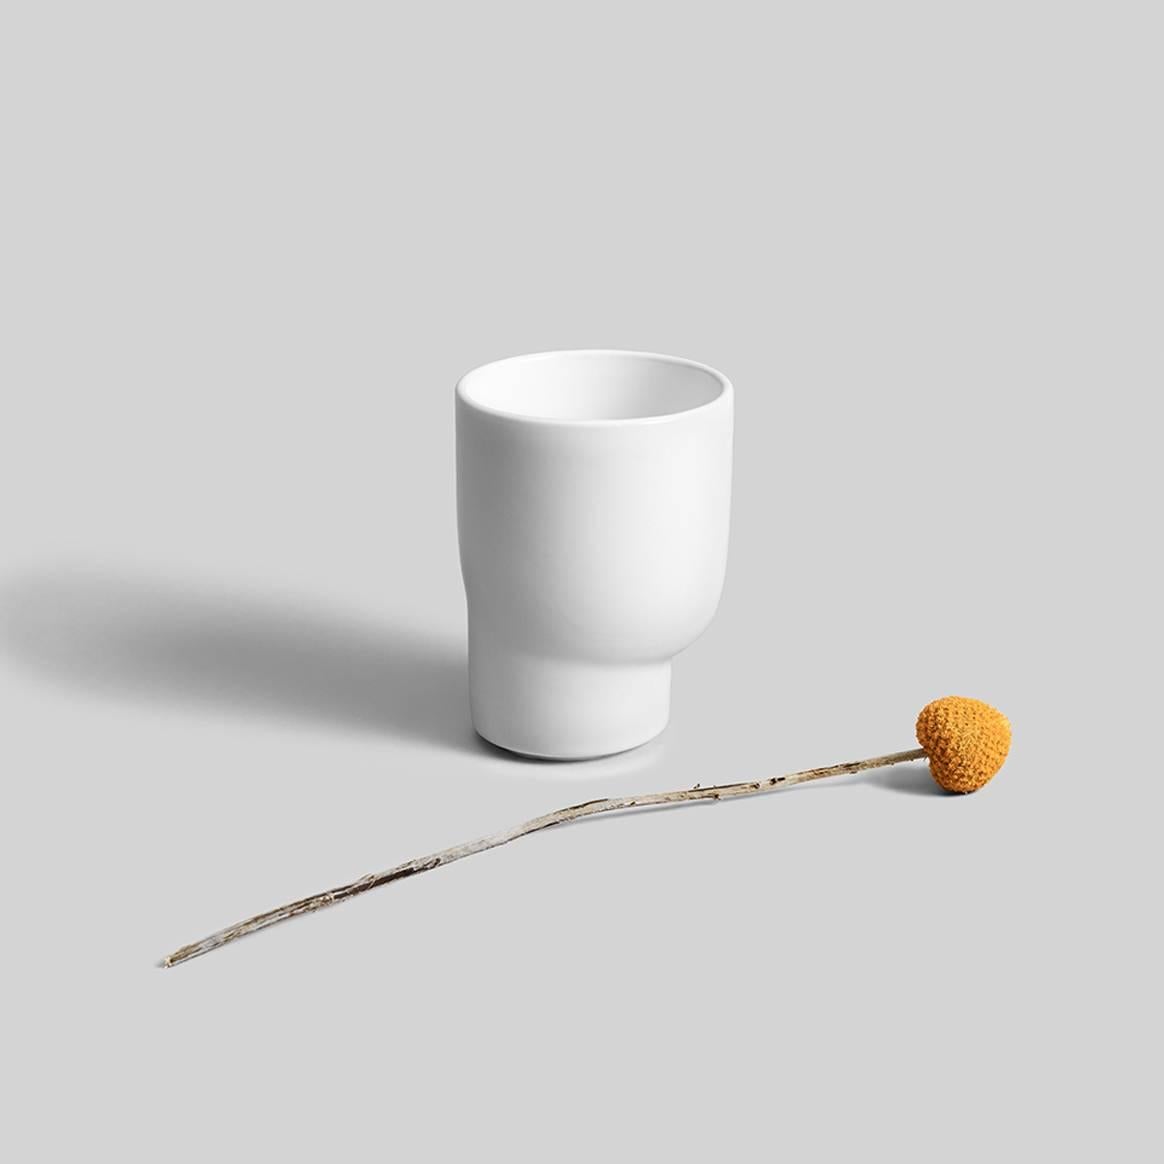 Modern Glitch Vase / Vessel Set in Contemporary 3D Printed Gloss White Porcelain For Sale